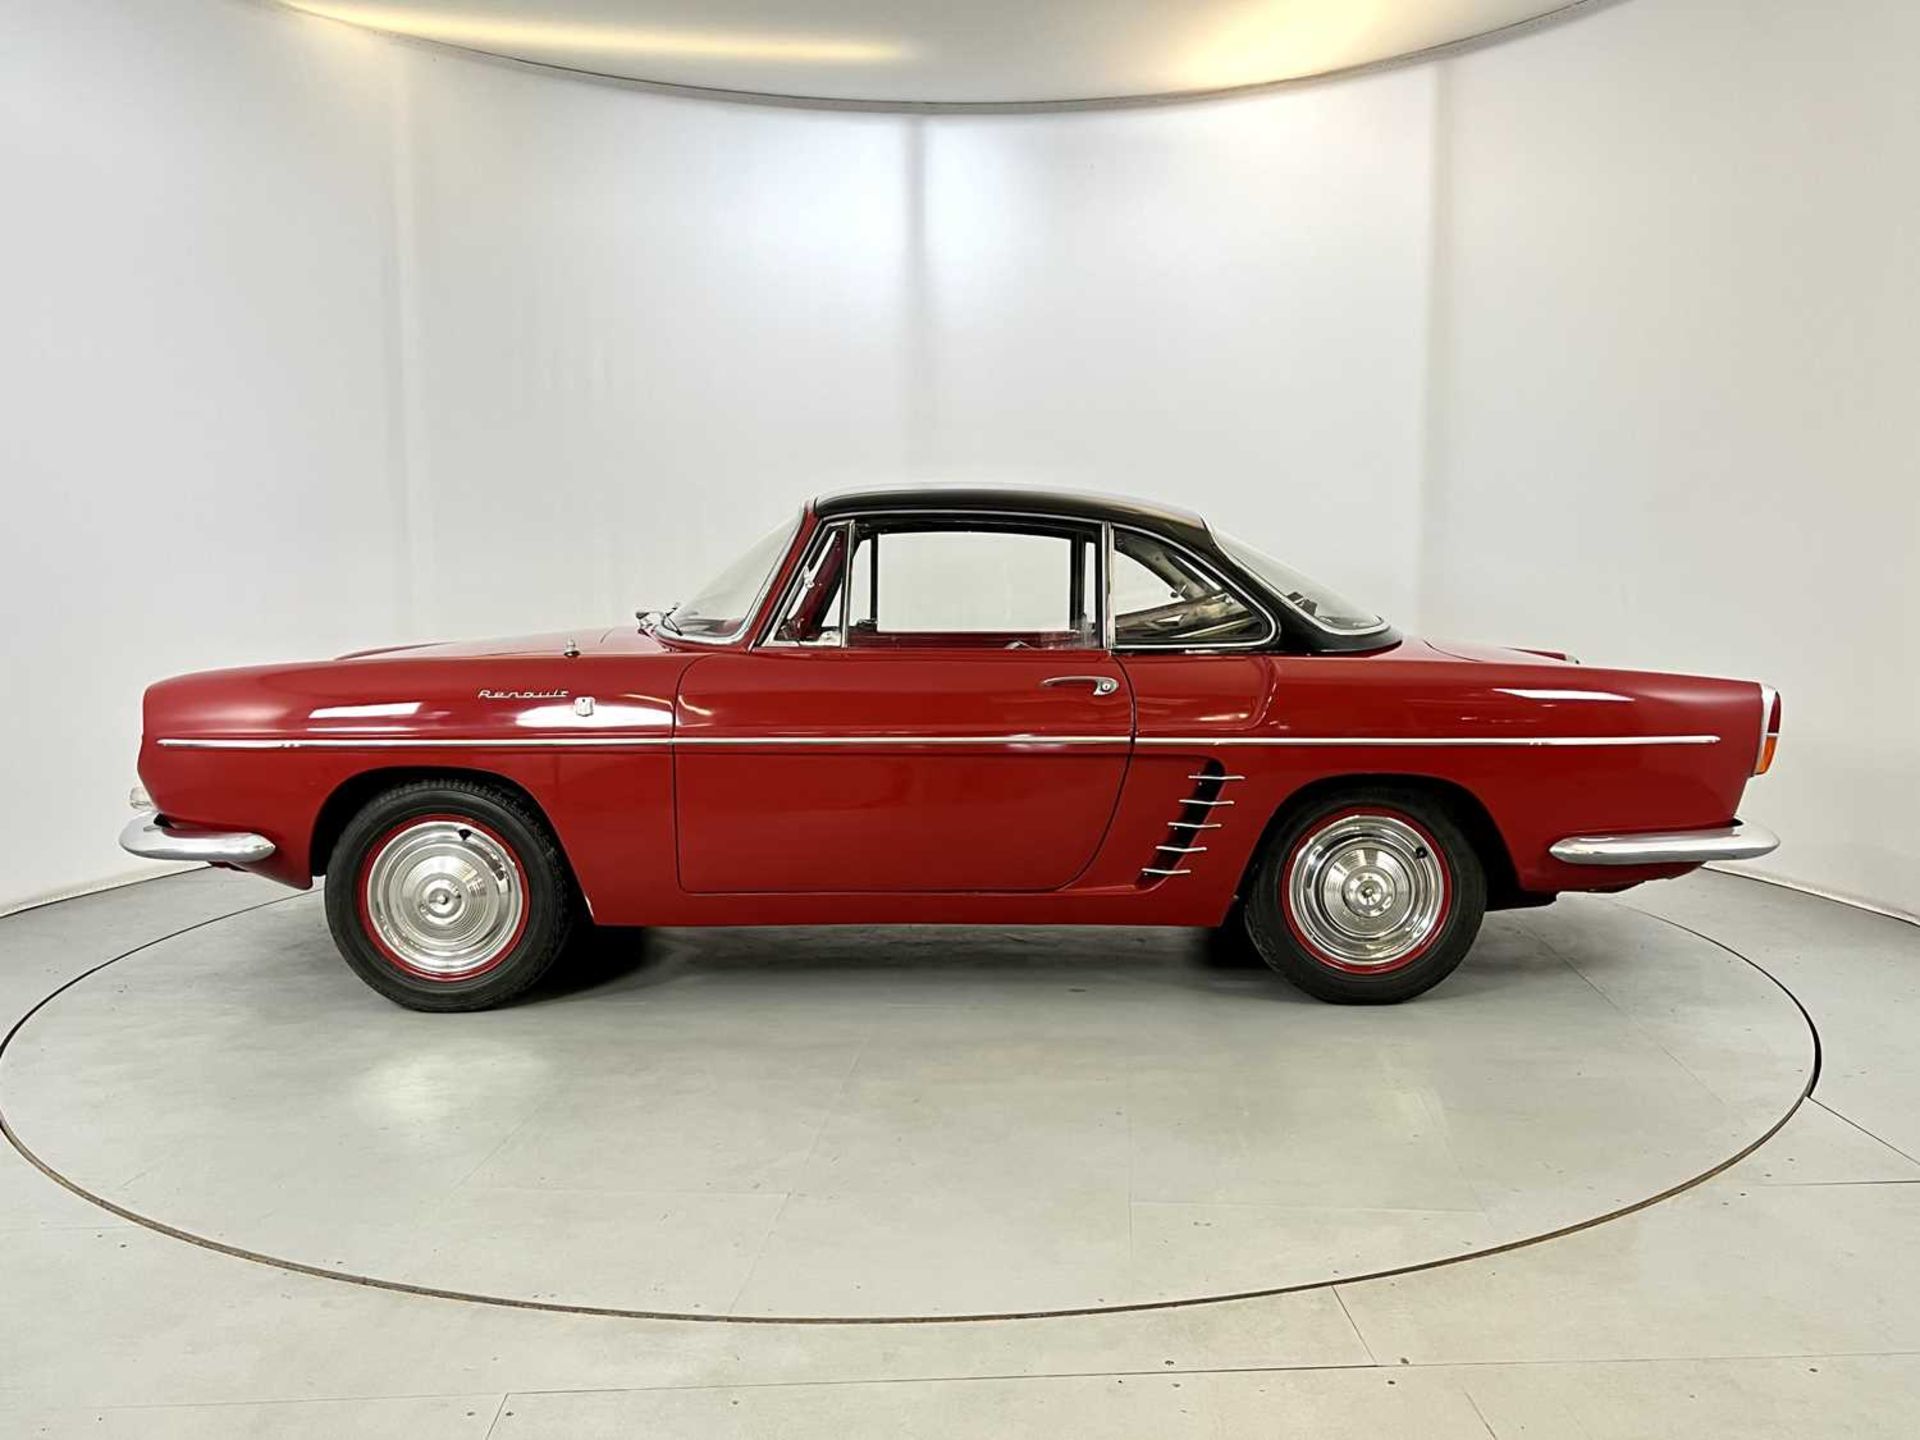 1962 Renault Floride Convertible - Image 5 of 43